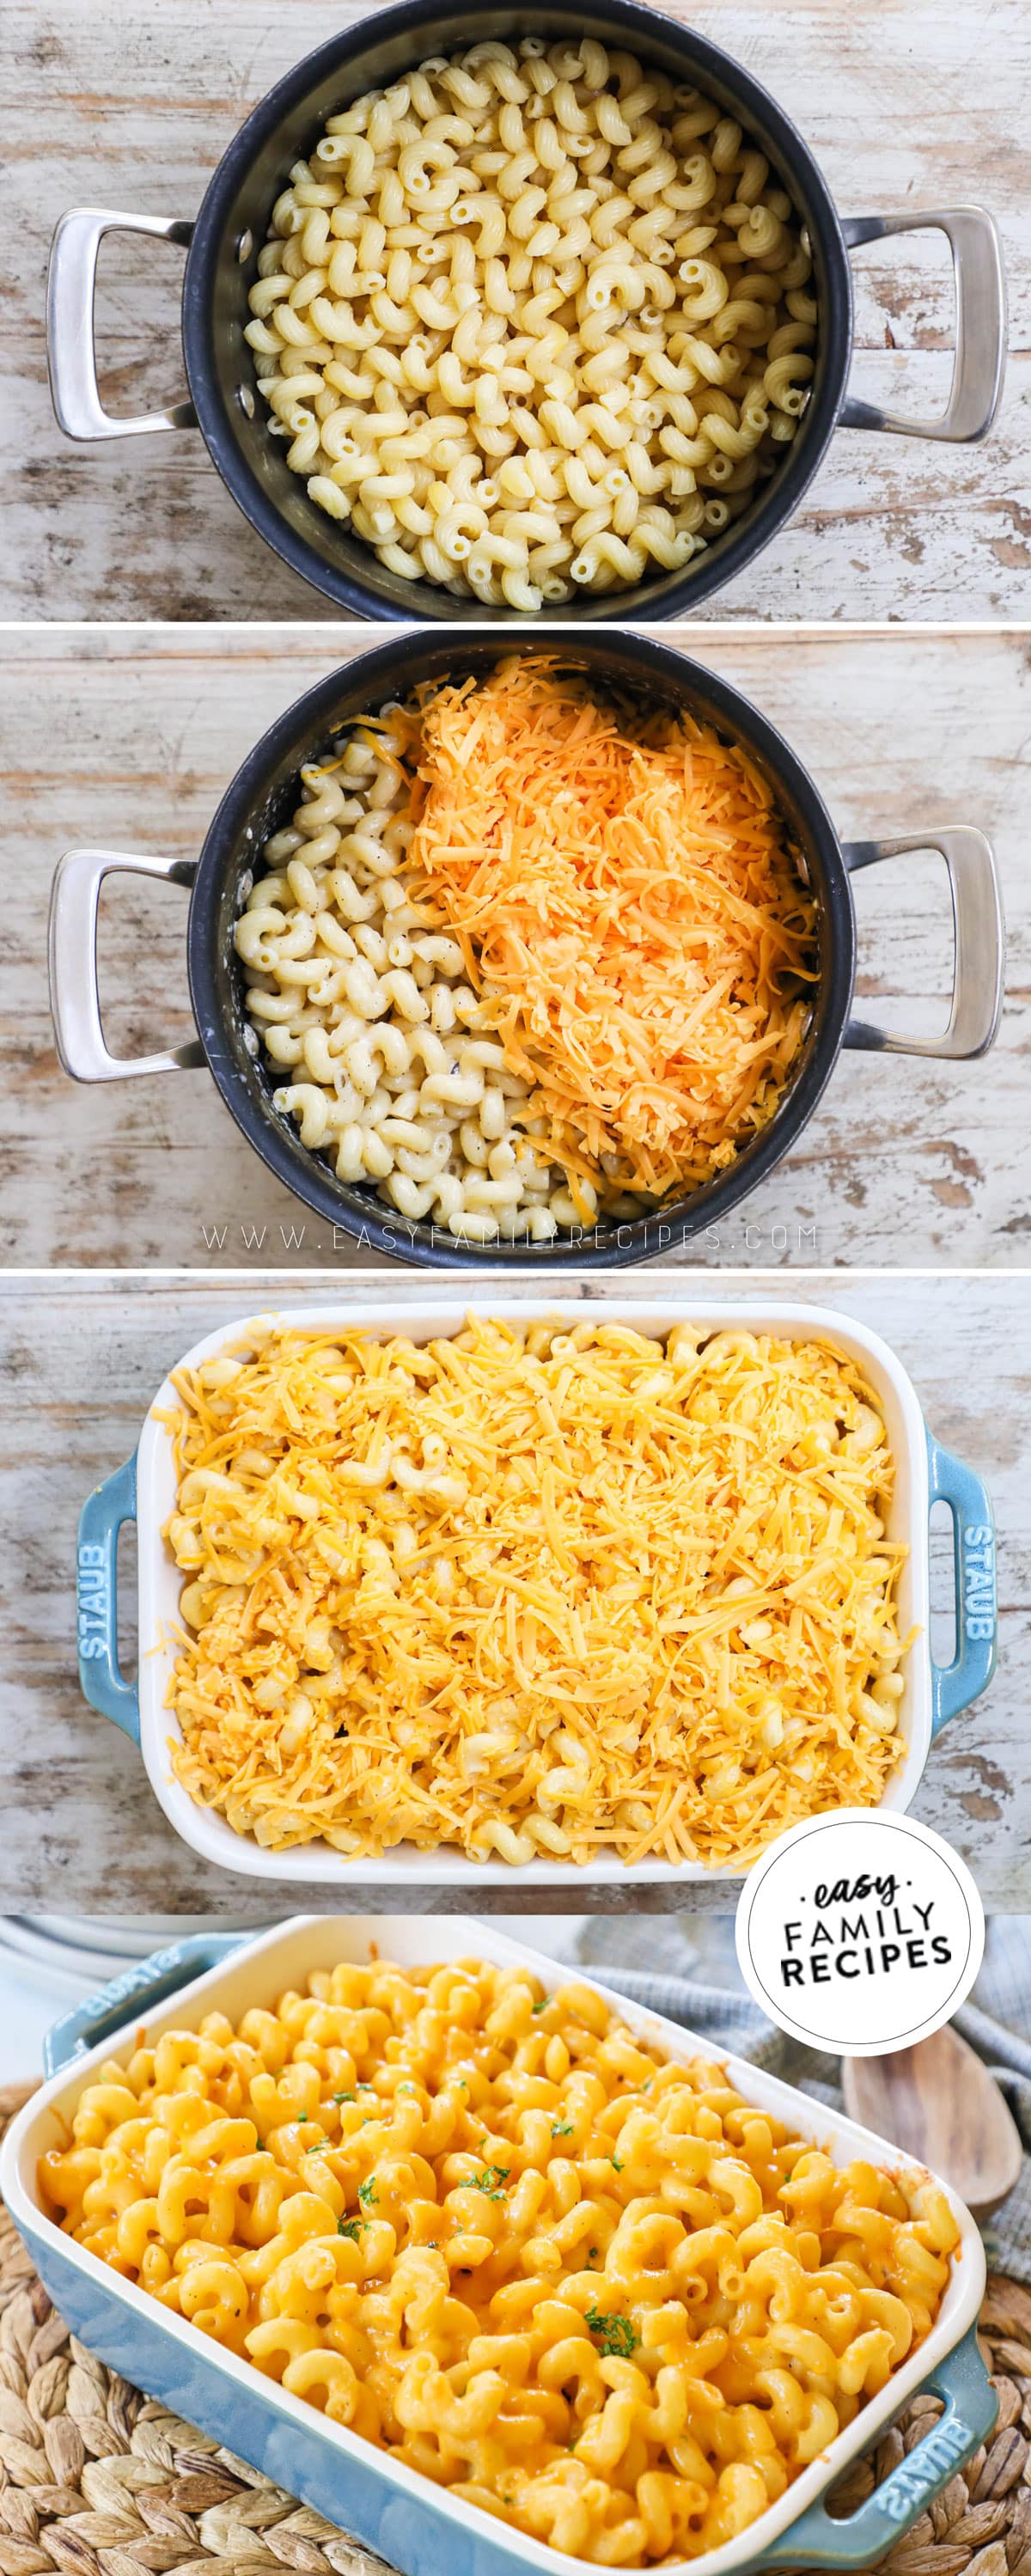 Steps to make baked mac and cheese step 1 make the pasta, step 2 add all other ingredients to the hot, drained pasta and mix, step 3 transfer to a baking dish and bake, step 4 enjoy.